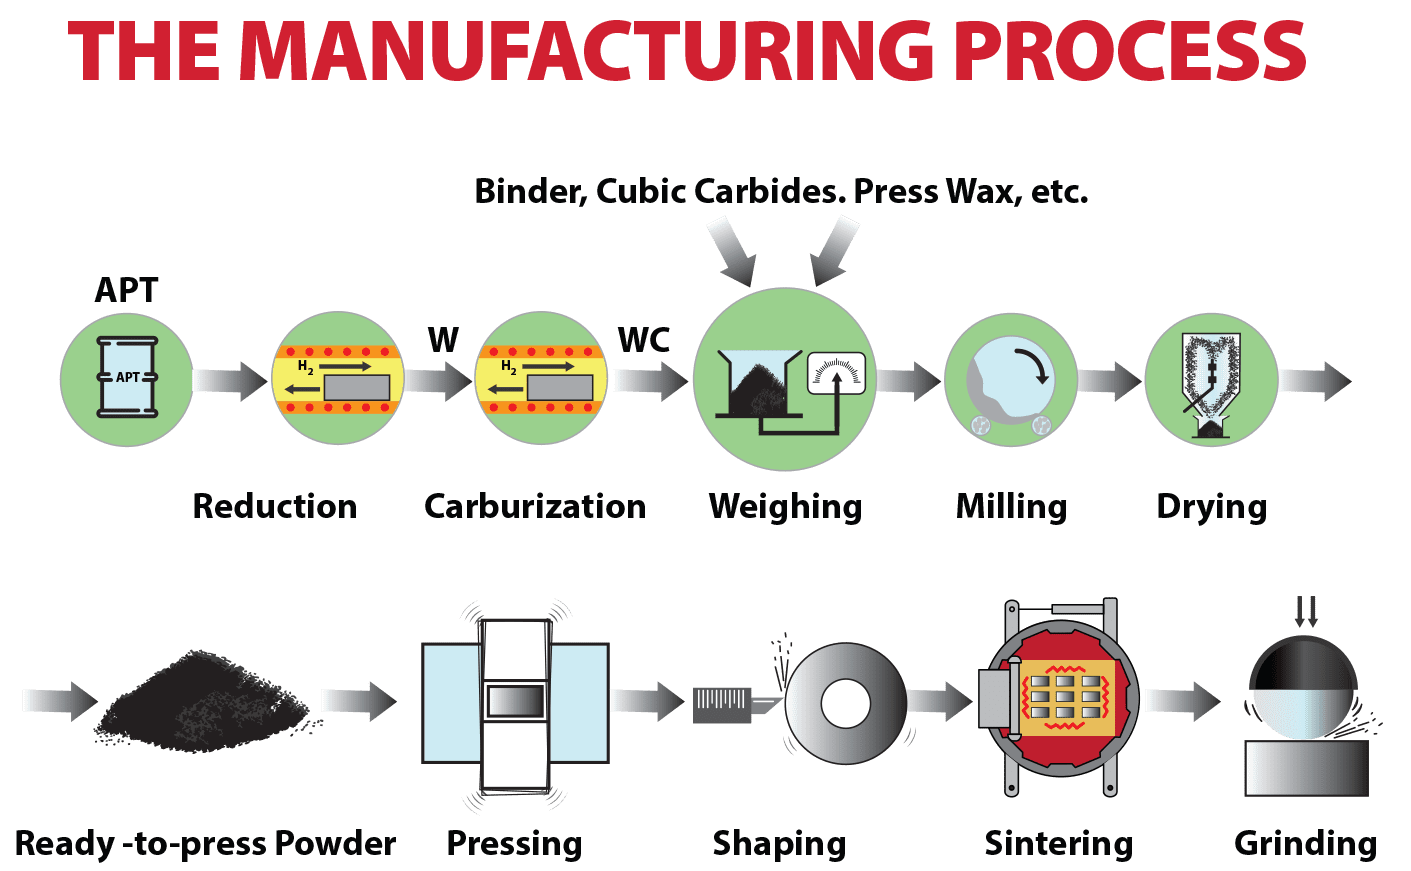 The manufacturing process of General Carbide from start to finish